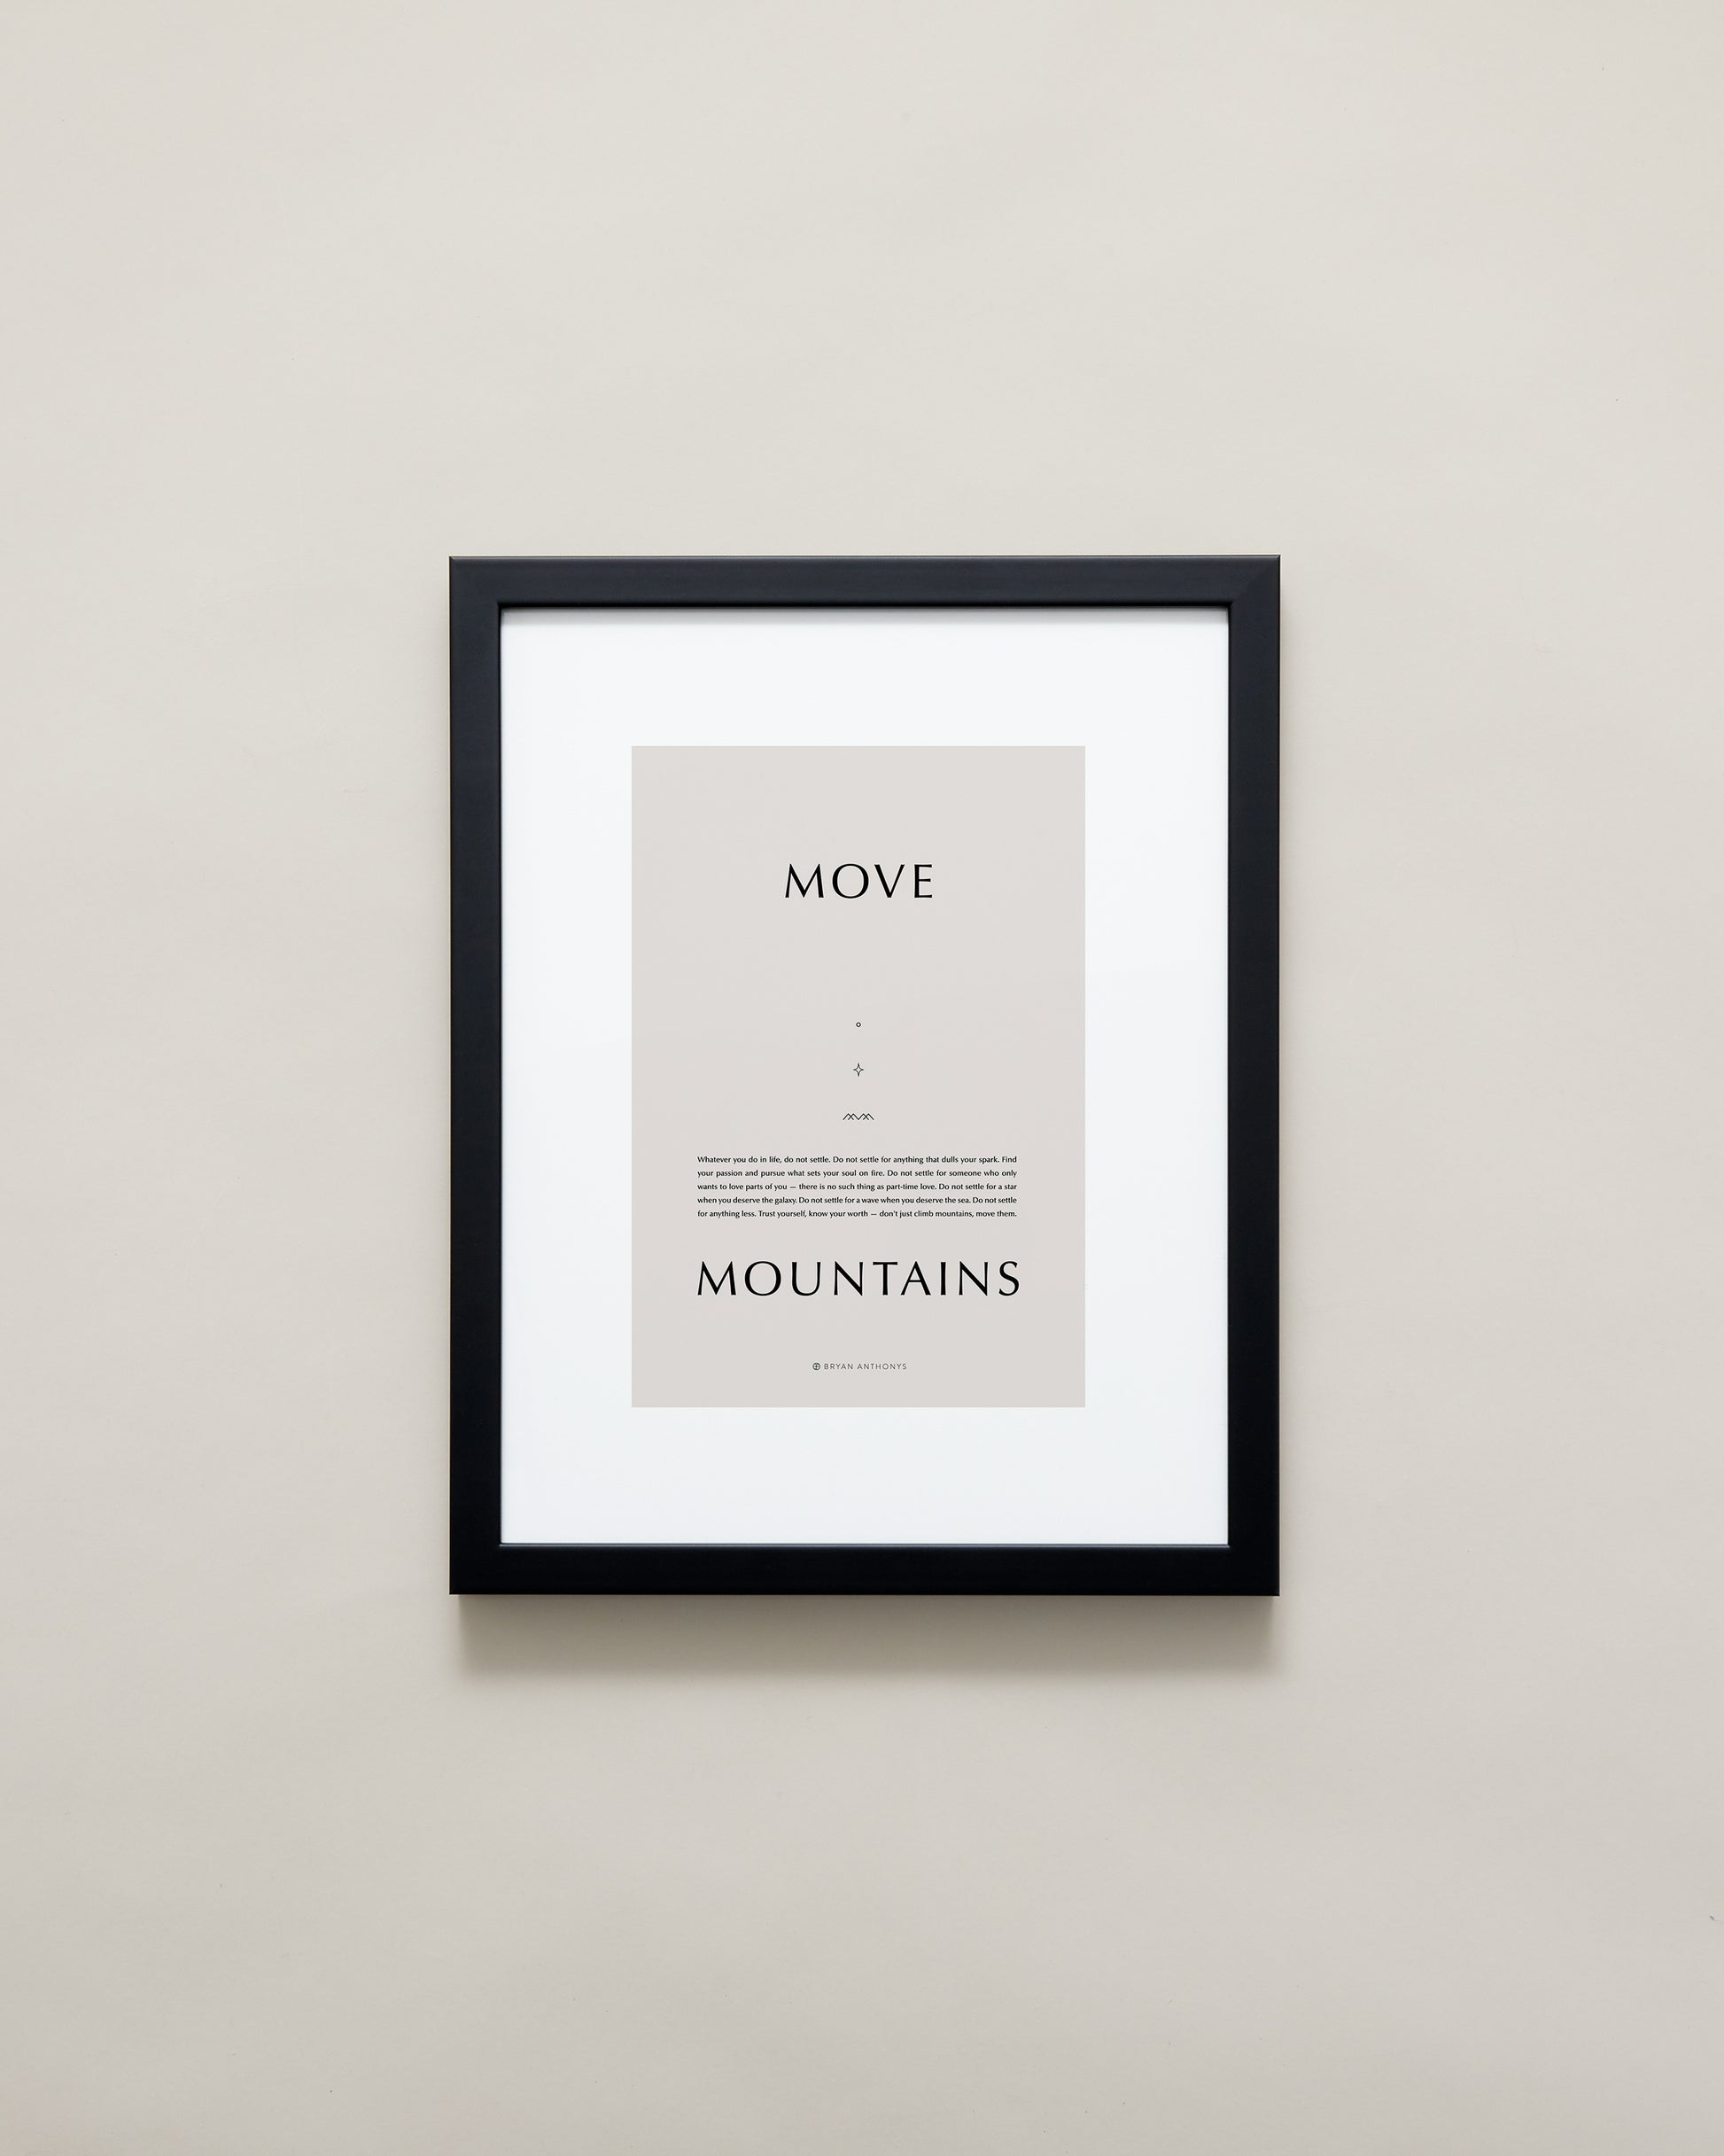 Bryan Anthonys Home Decor Purposeful Prints Move Mountains Iconic Framed Print Tan Art With Black Frame 11x14